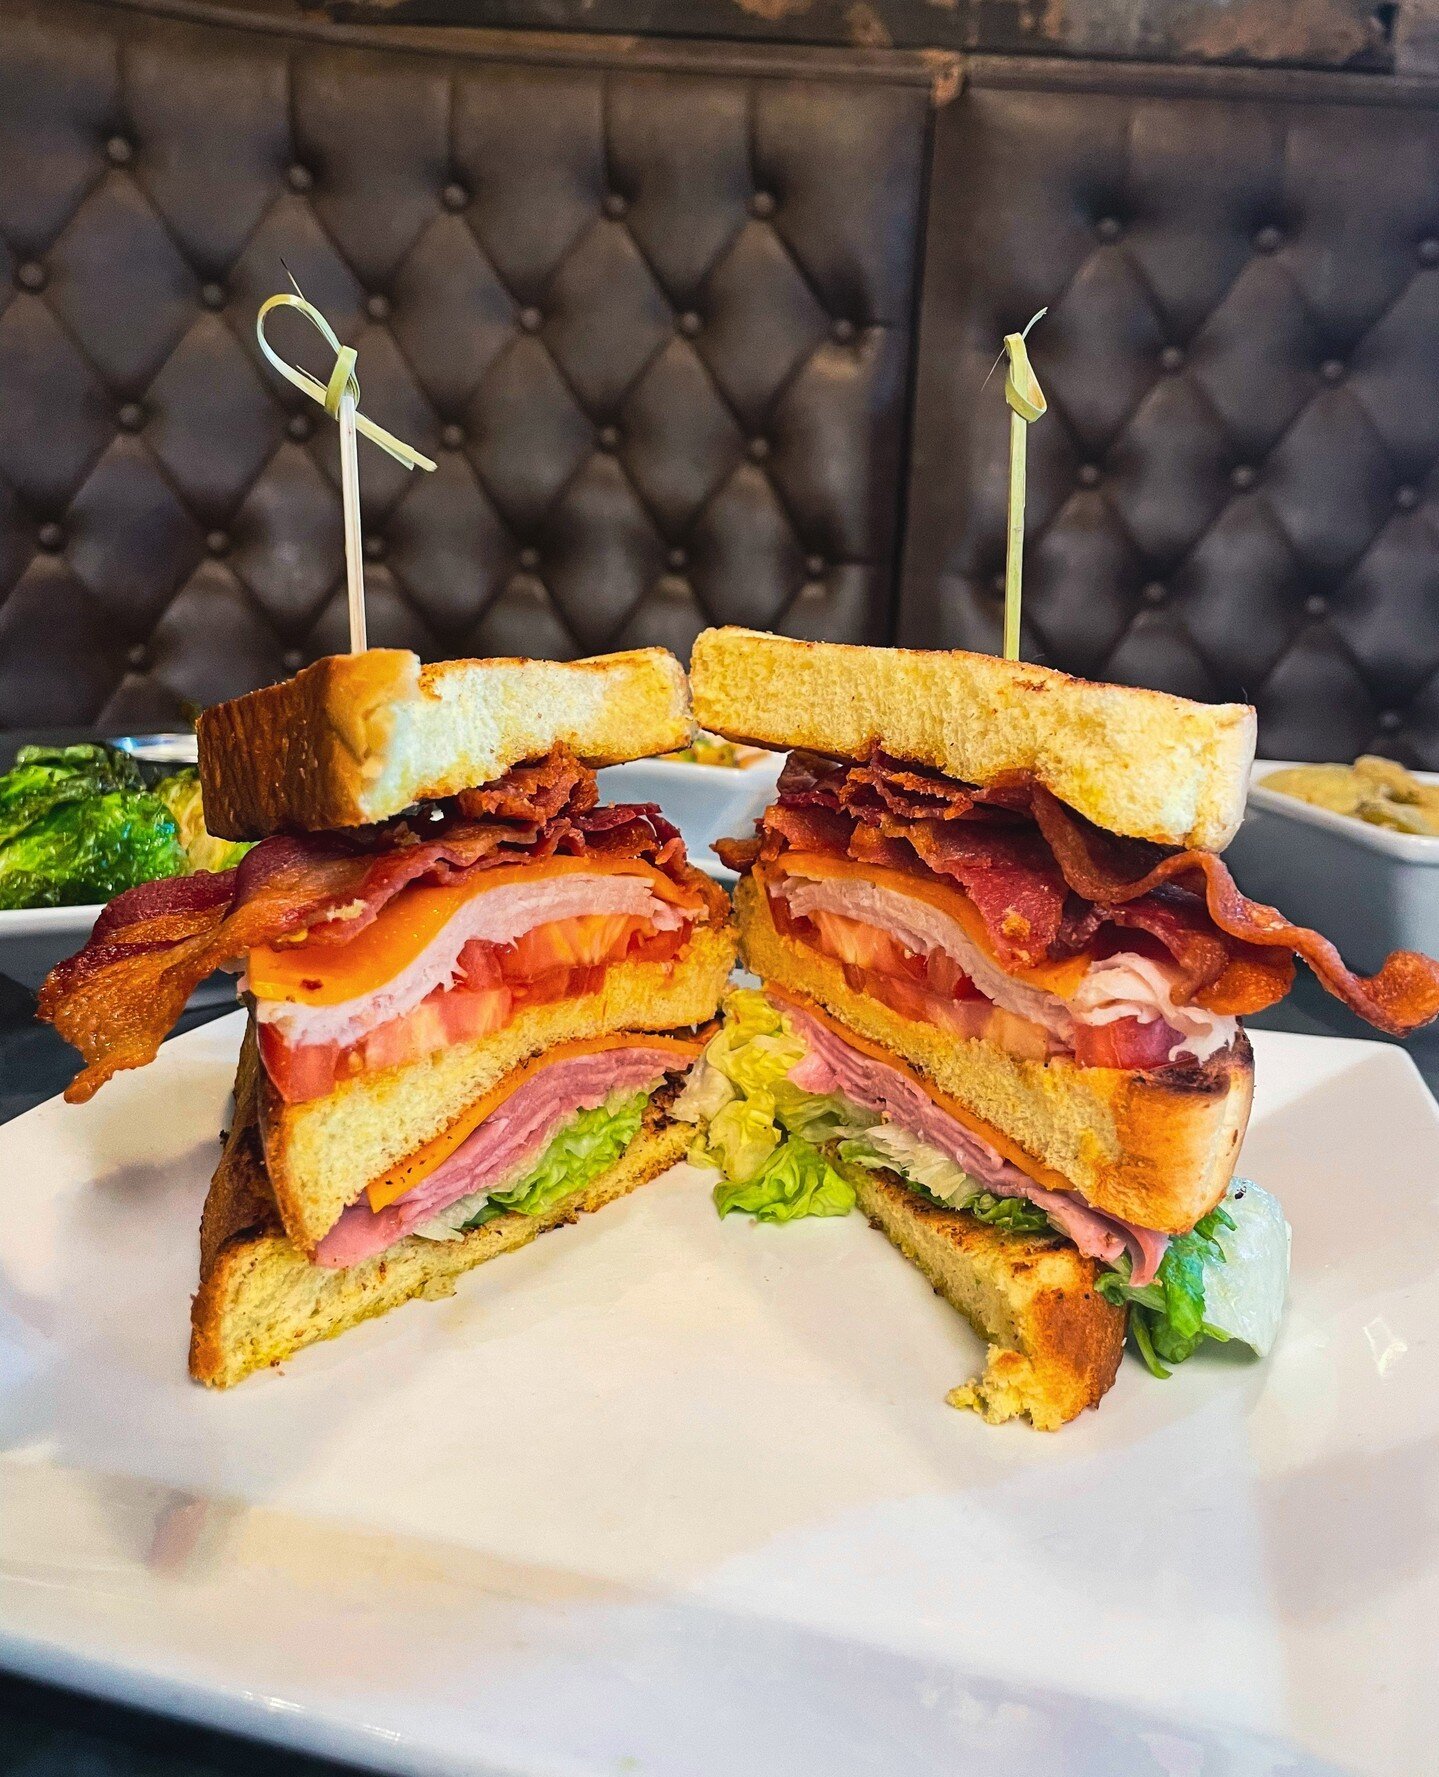 The next time you stop by for lunch, you've got to try The Texas Club! ⁠
This flavorful double-decker sandwich is stacked with country ham, turkey, bacon, cheddar, lettuce, and juicy tomato on toasted Texas bread.⁠
⁠
Grab a friend, sit back, and take